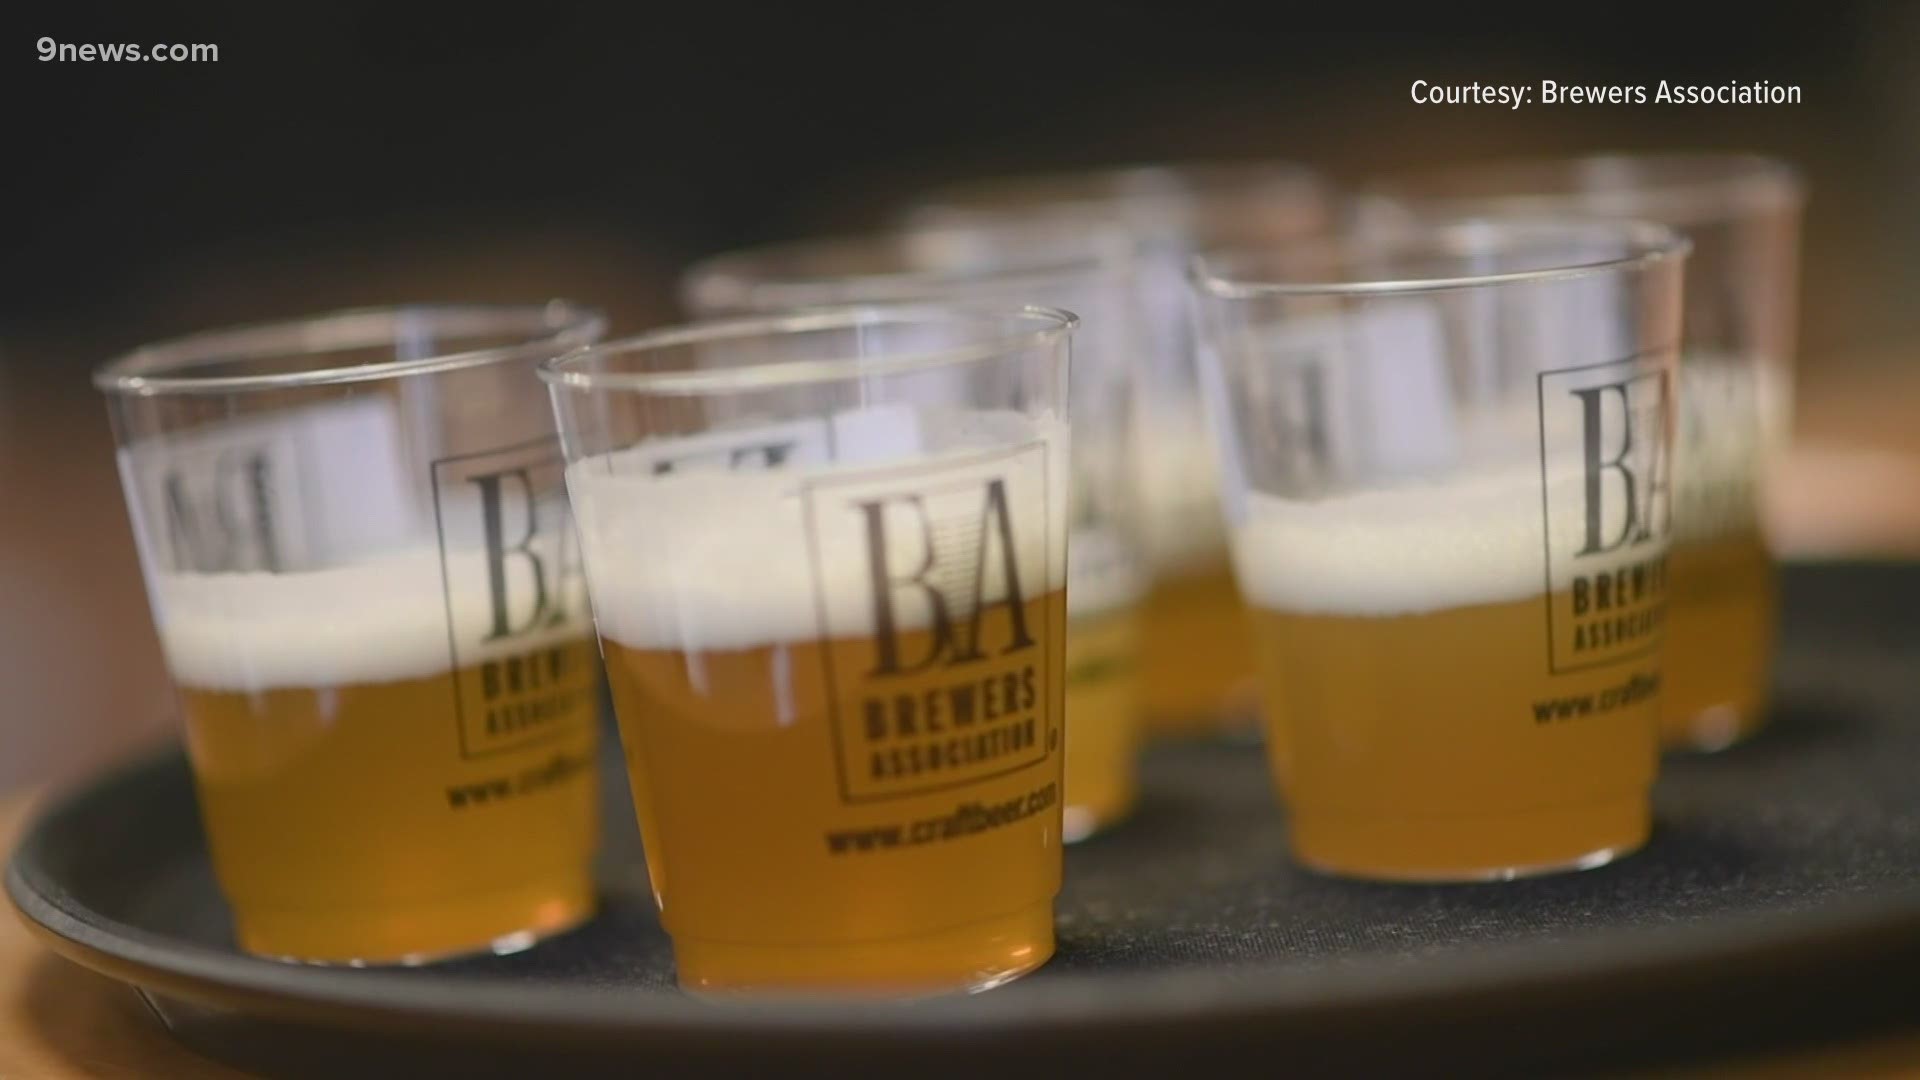 The Brewers Association will still host the 2021 GABF competition and awards ceremony, but the public festival is being canceled for a second year.